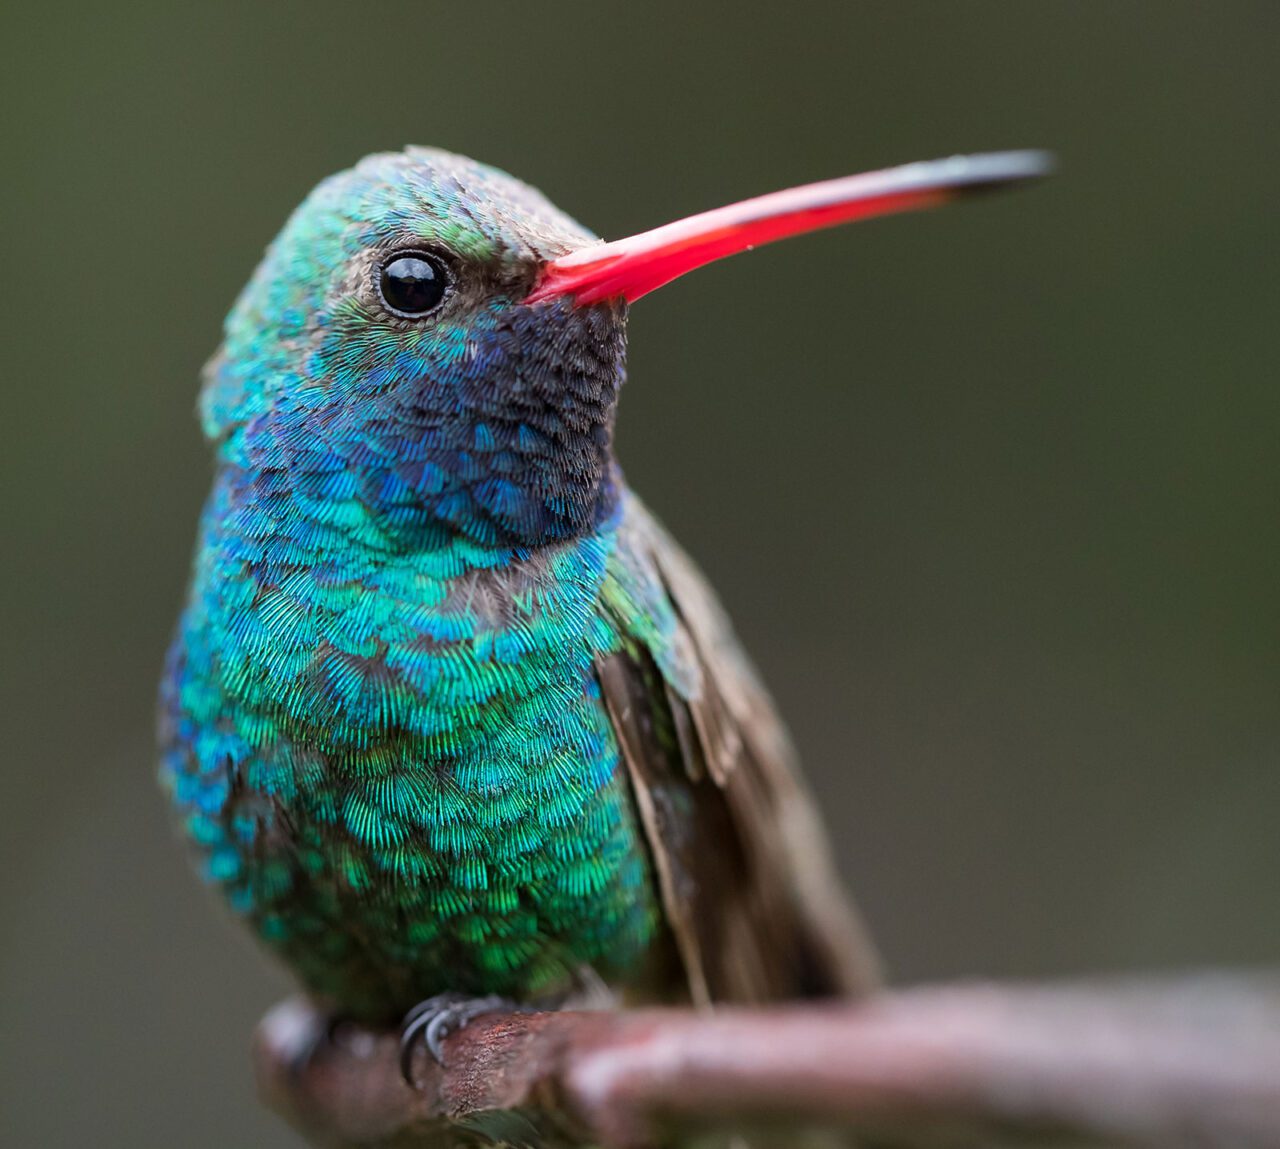 A bright little green and blue bird with a long, red bill